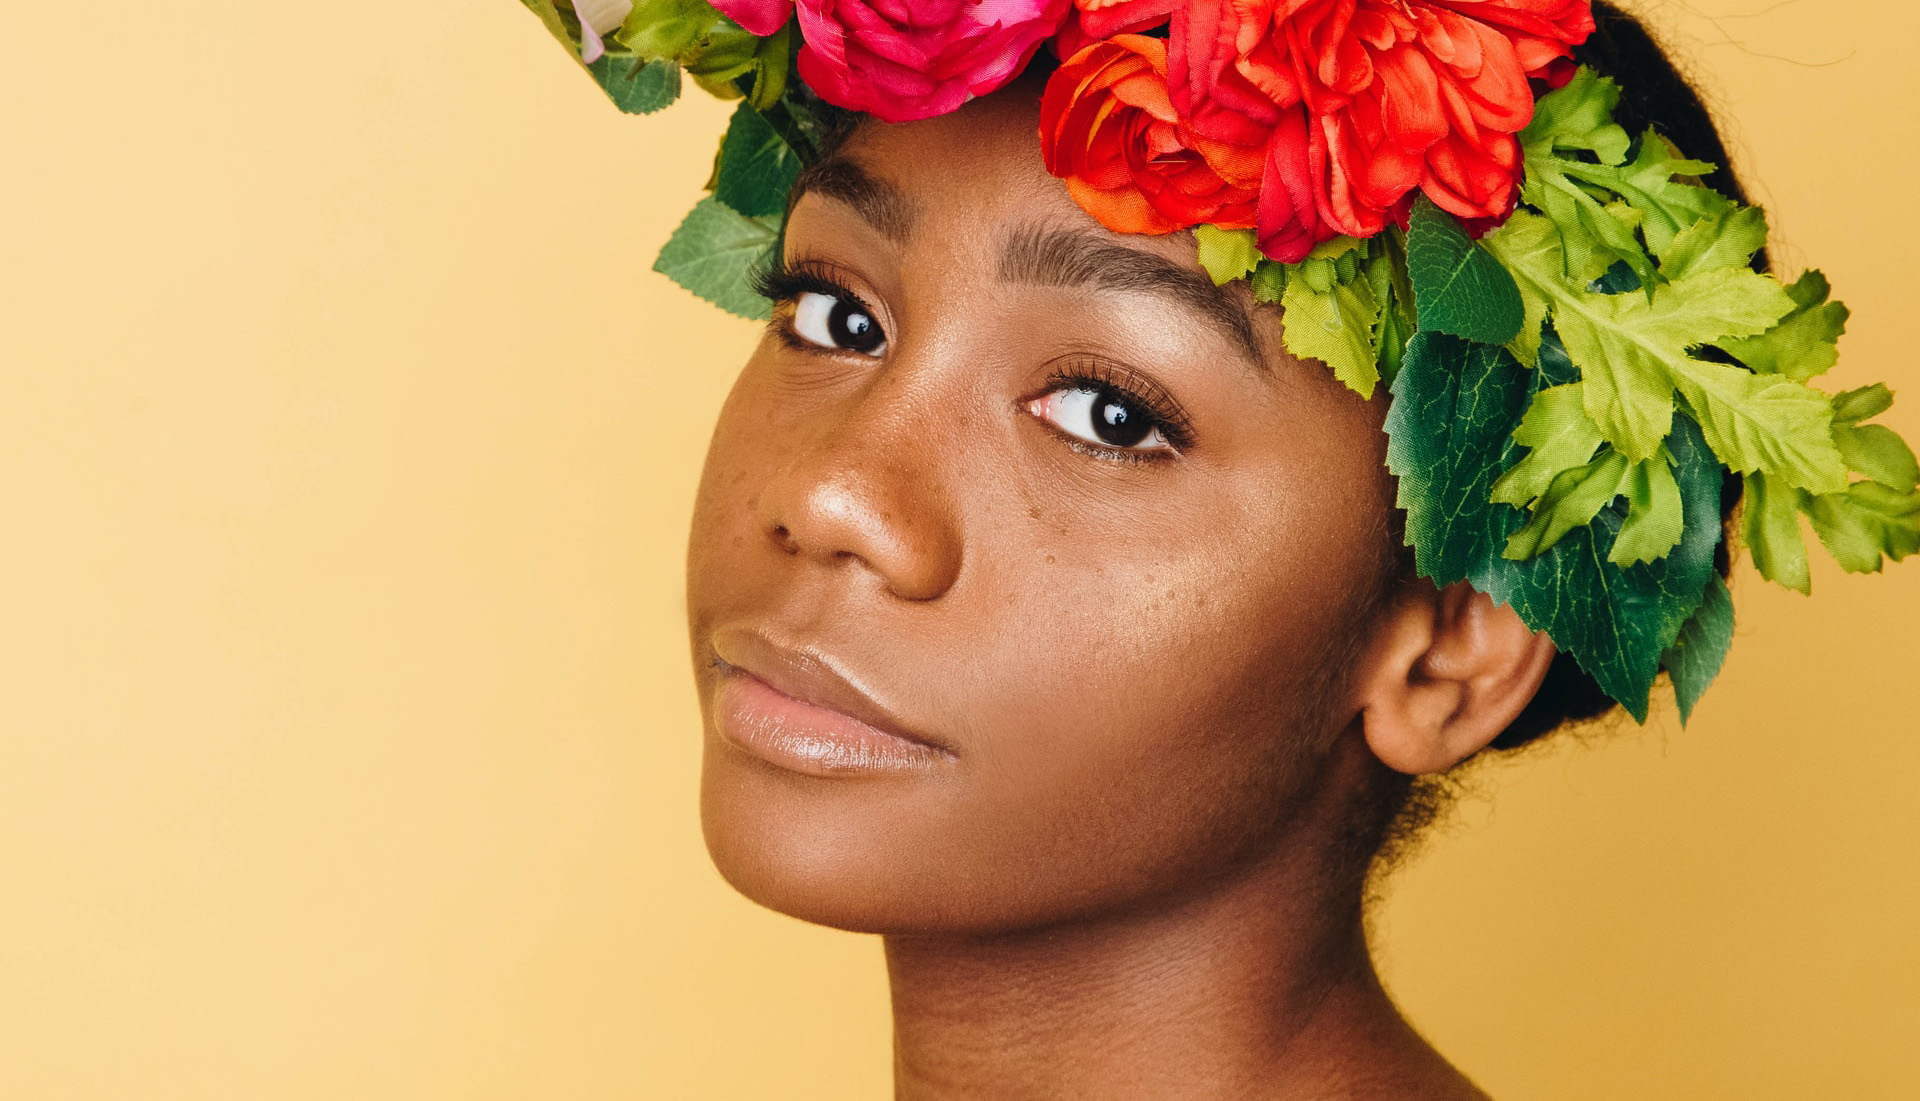 Image of person with healthy skin wearing a flower crown.